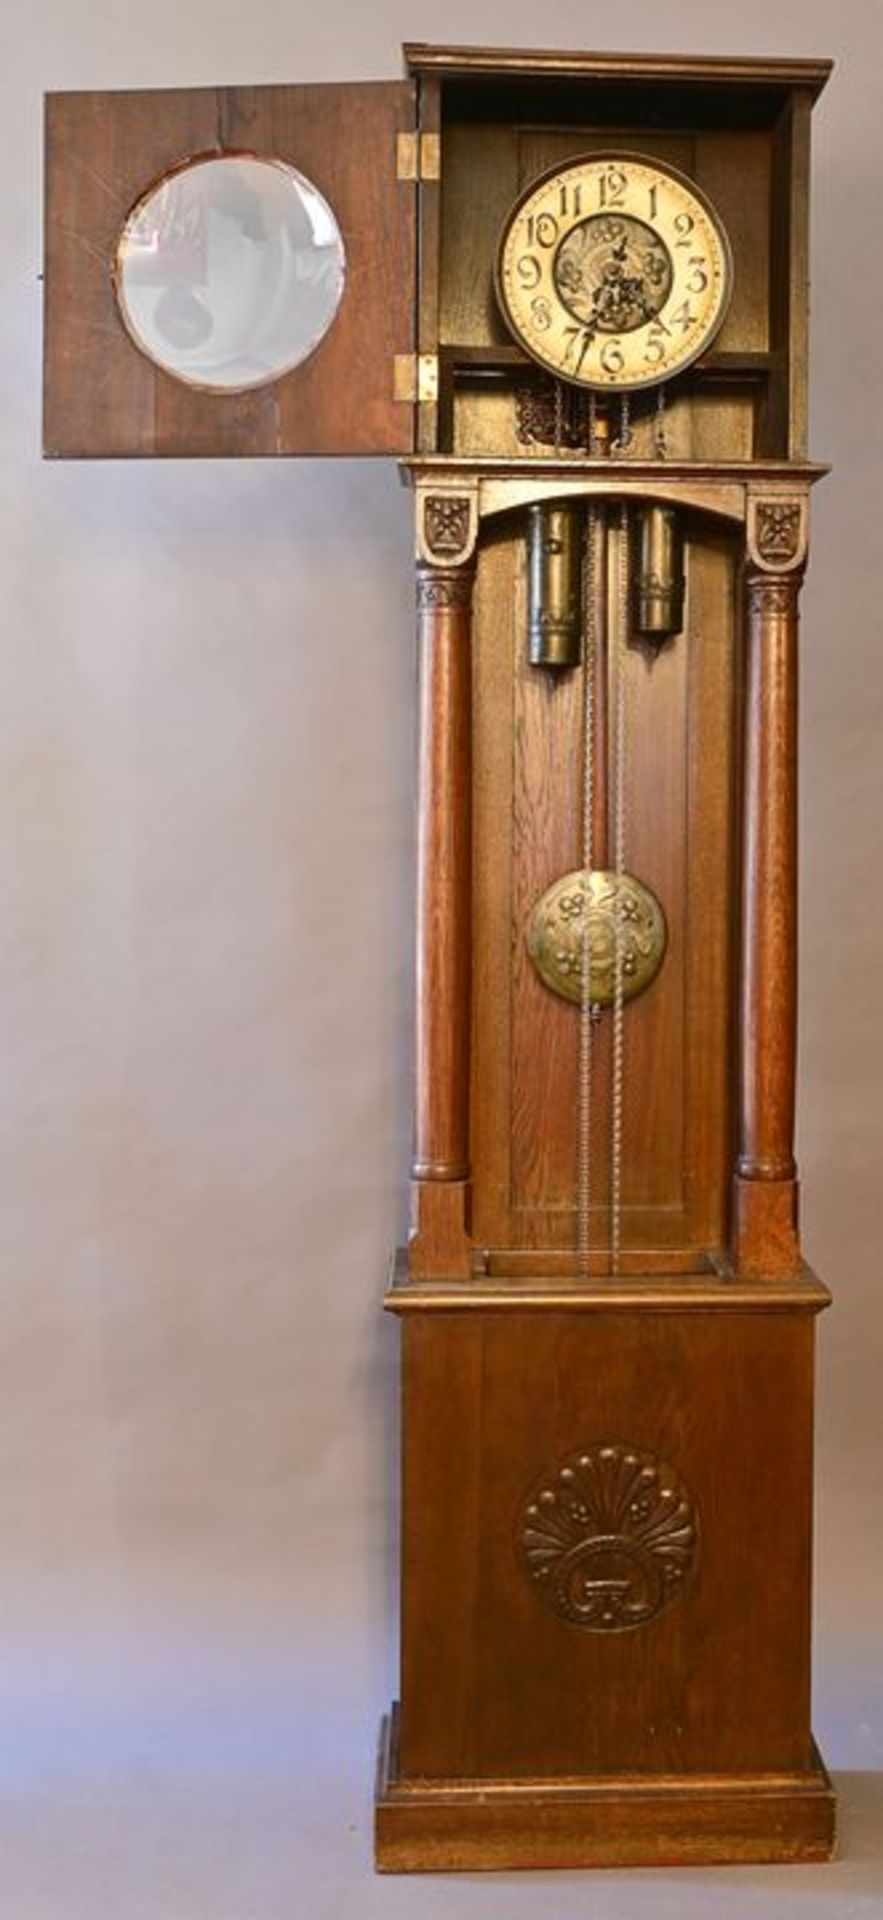 Standuhr / Grandfather's clock - Image 2 of 3